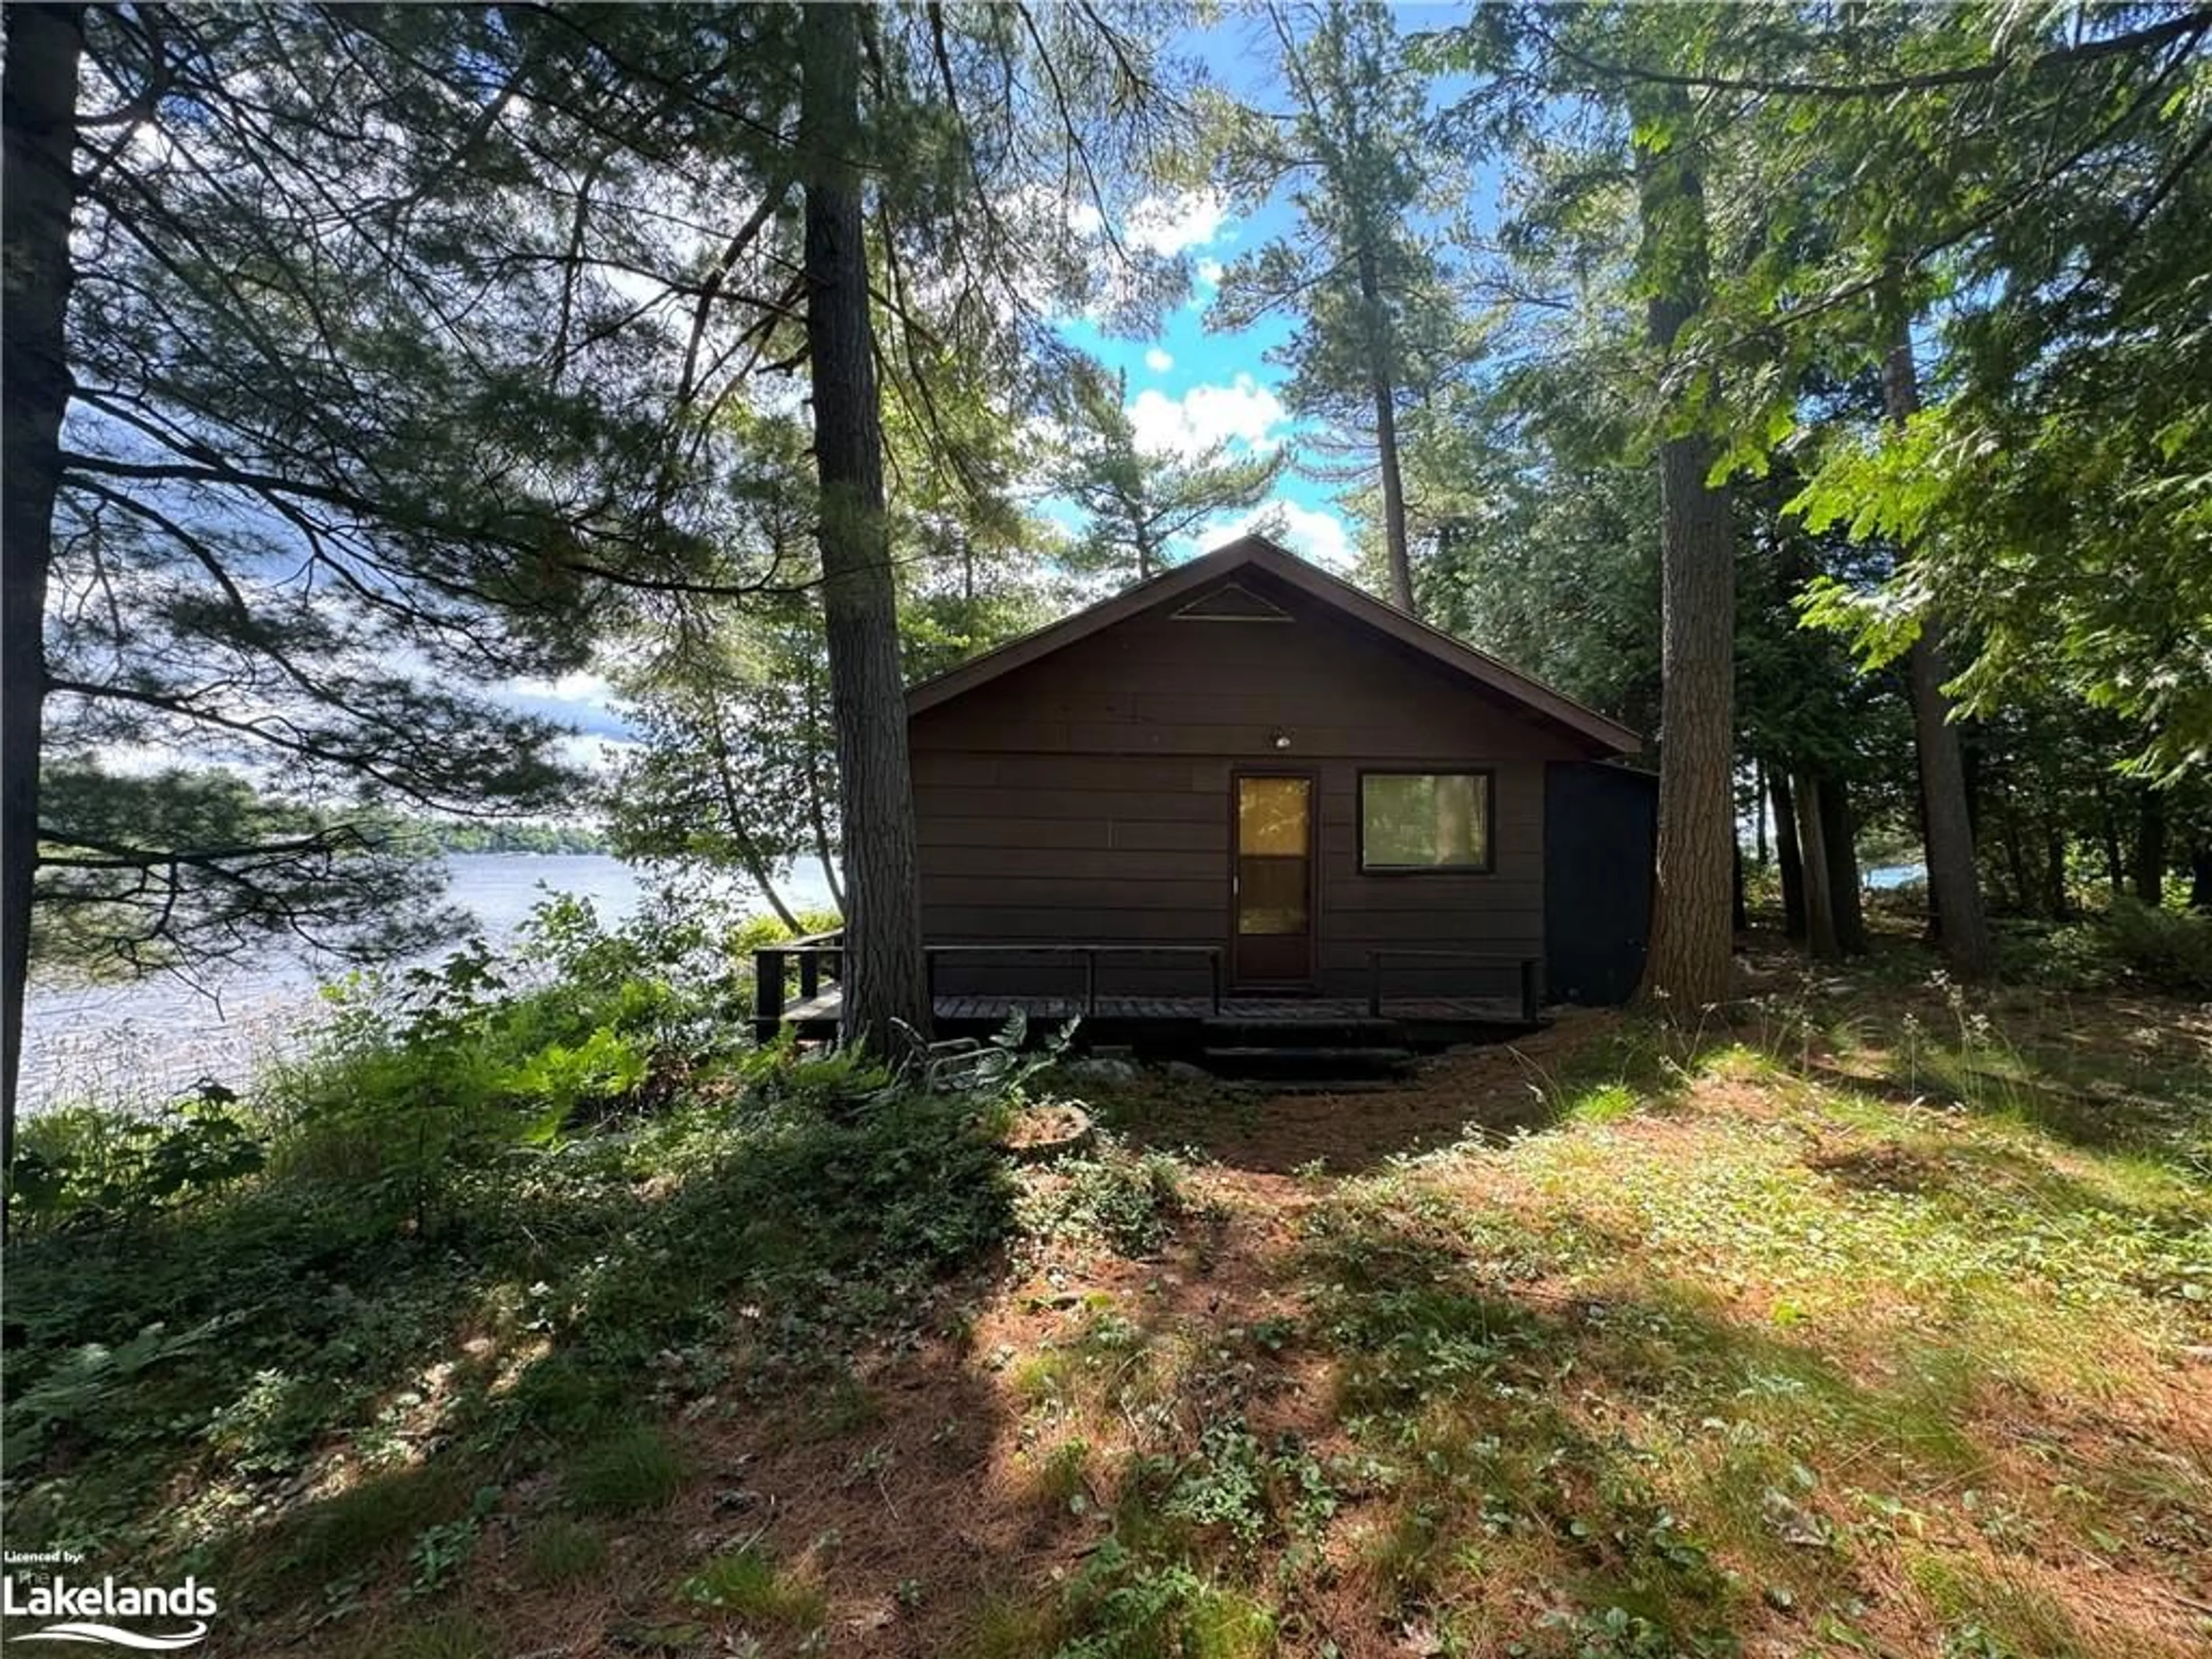 Cottage for 20 Is 140 Six Mile Lake, Port Severn Ontario L0K 1S0